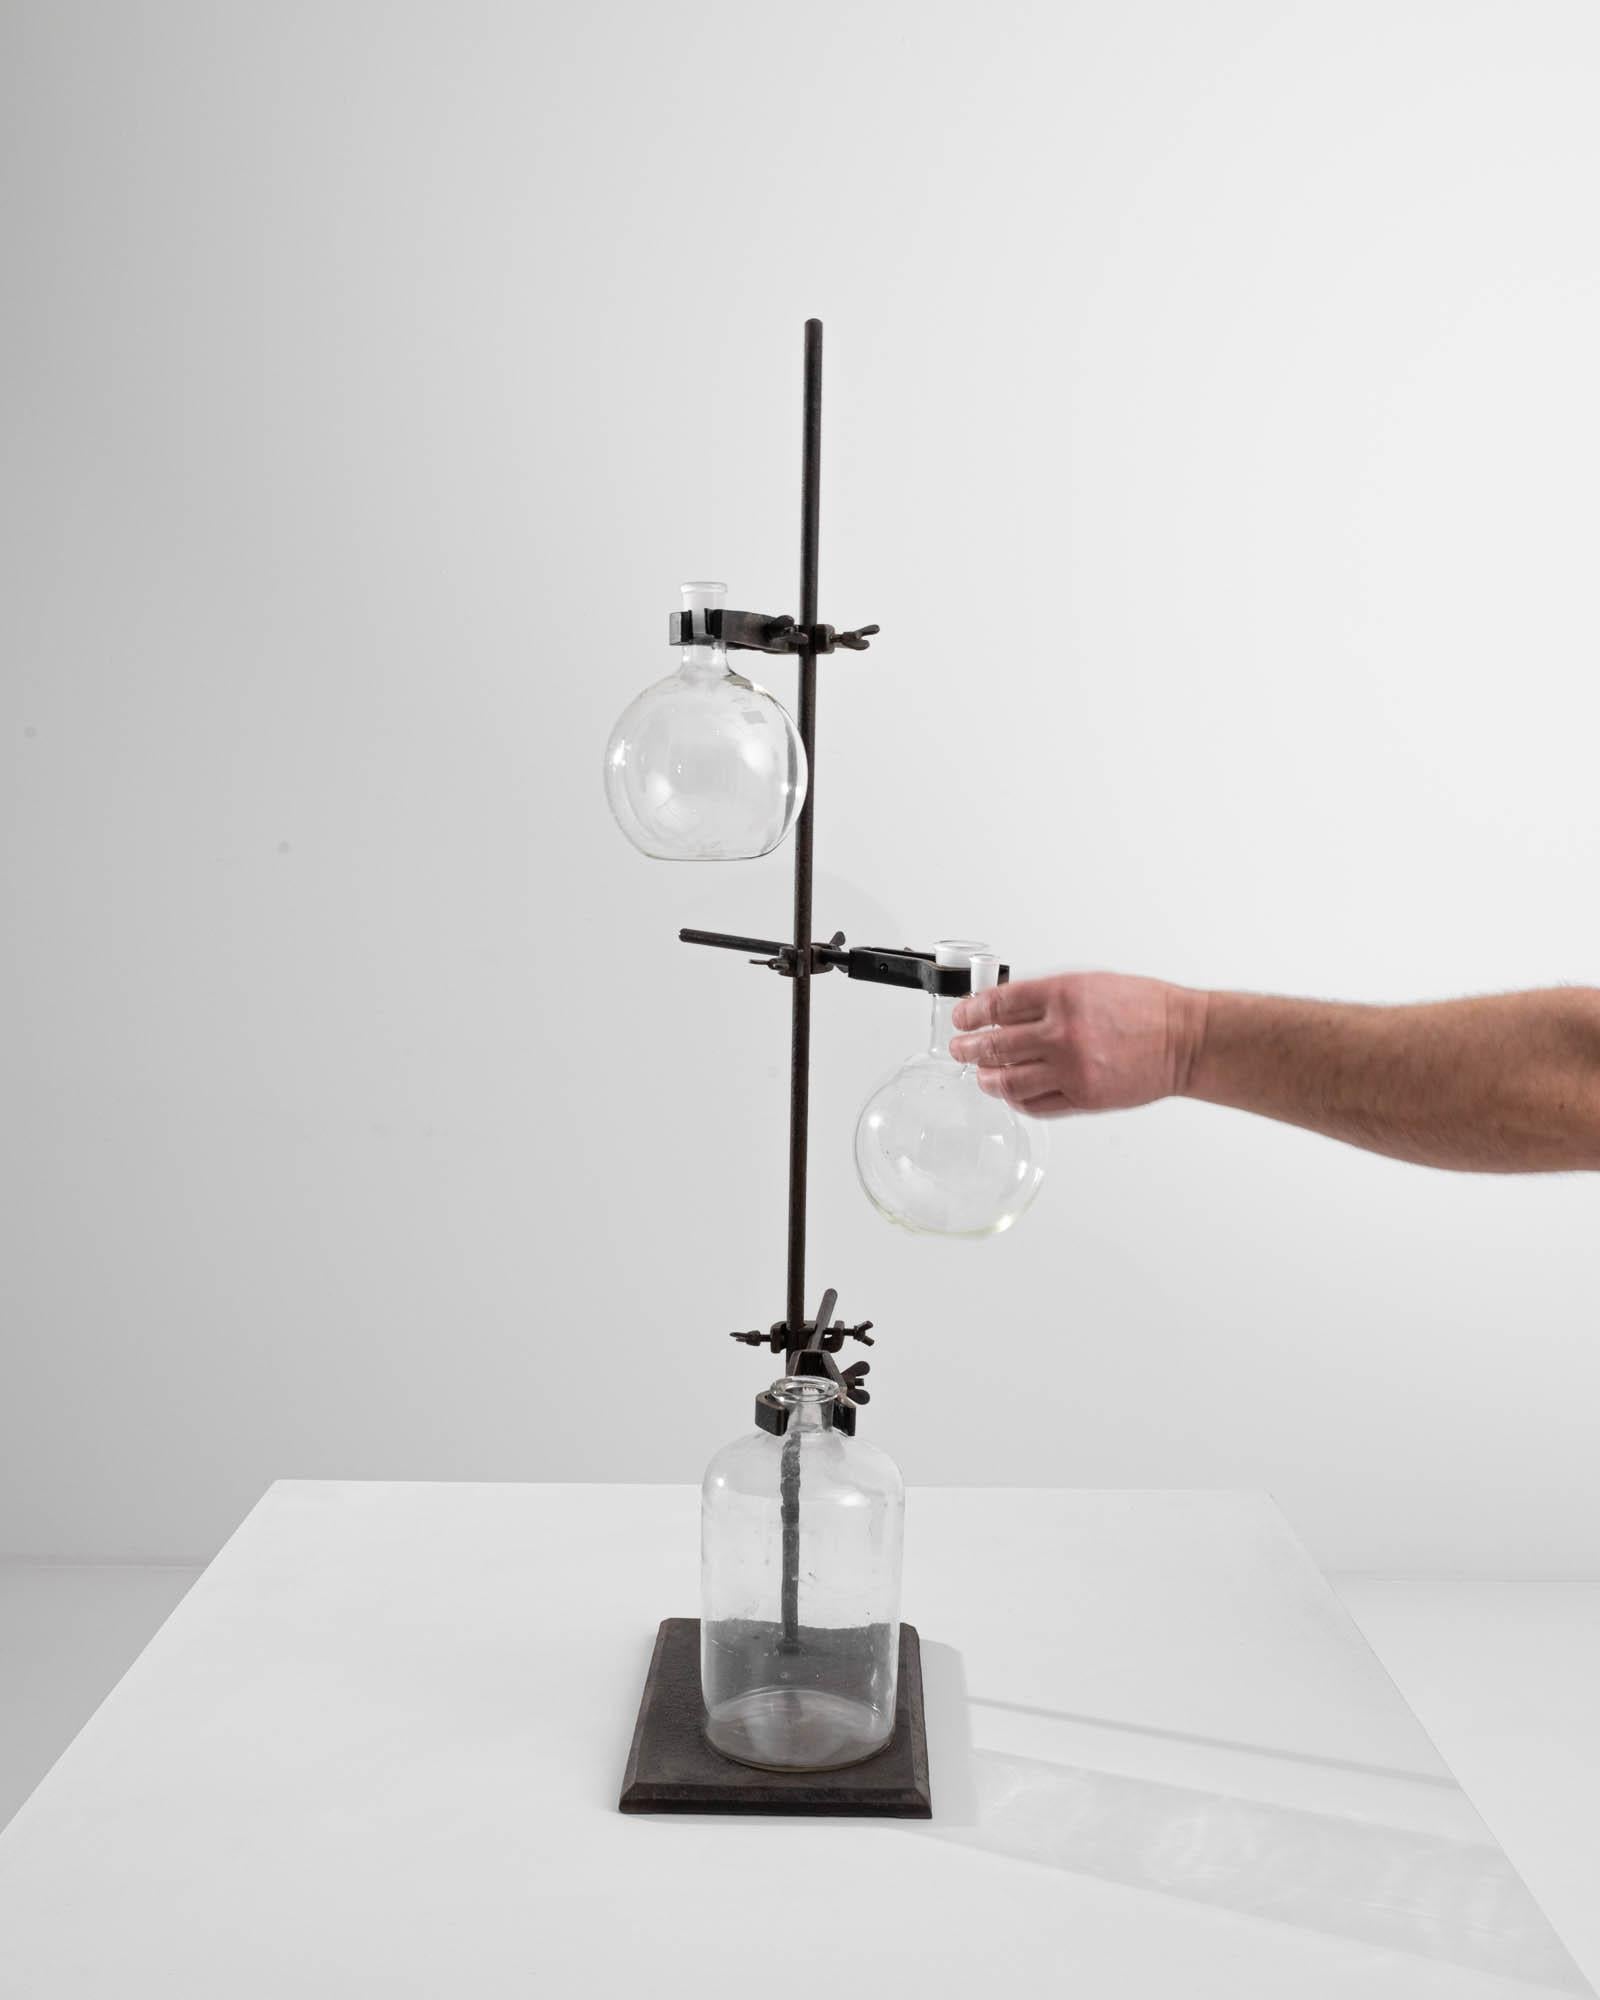 An intriguing and unique accent, this vintage lab-ware stand holds various vintage technical glasswares. Industrial, utilitarian, and scientific, yet also playful and curious, this vintage beaker holder presents a unique demeanor. Born for the